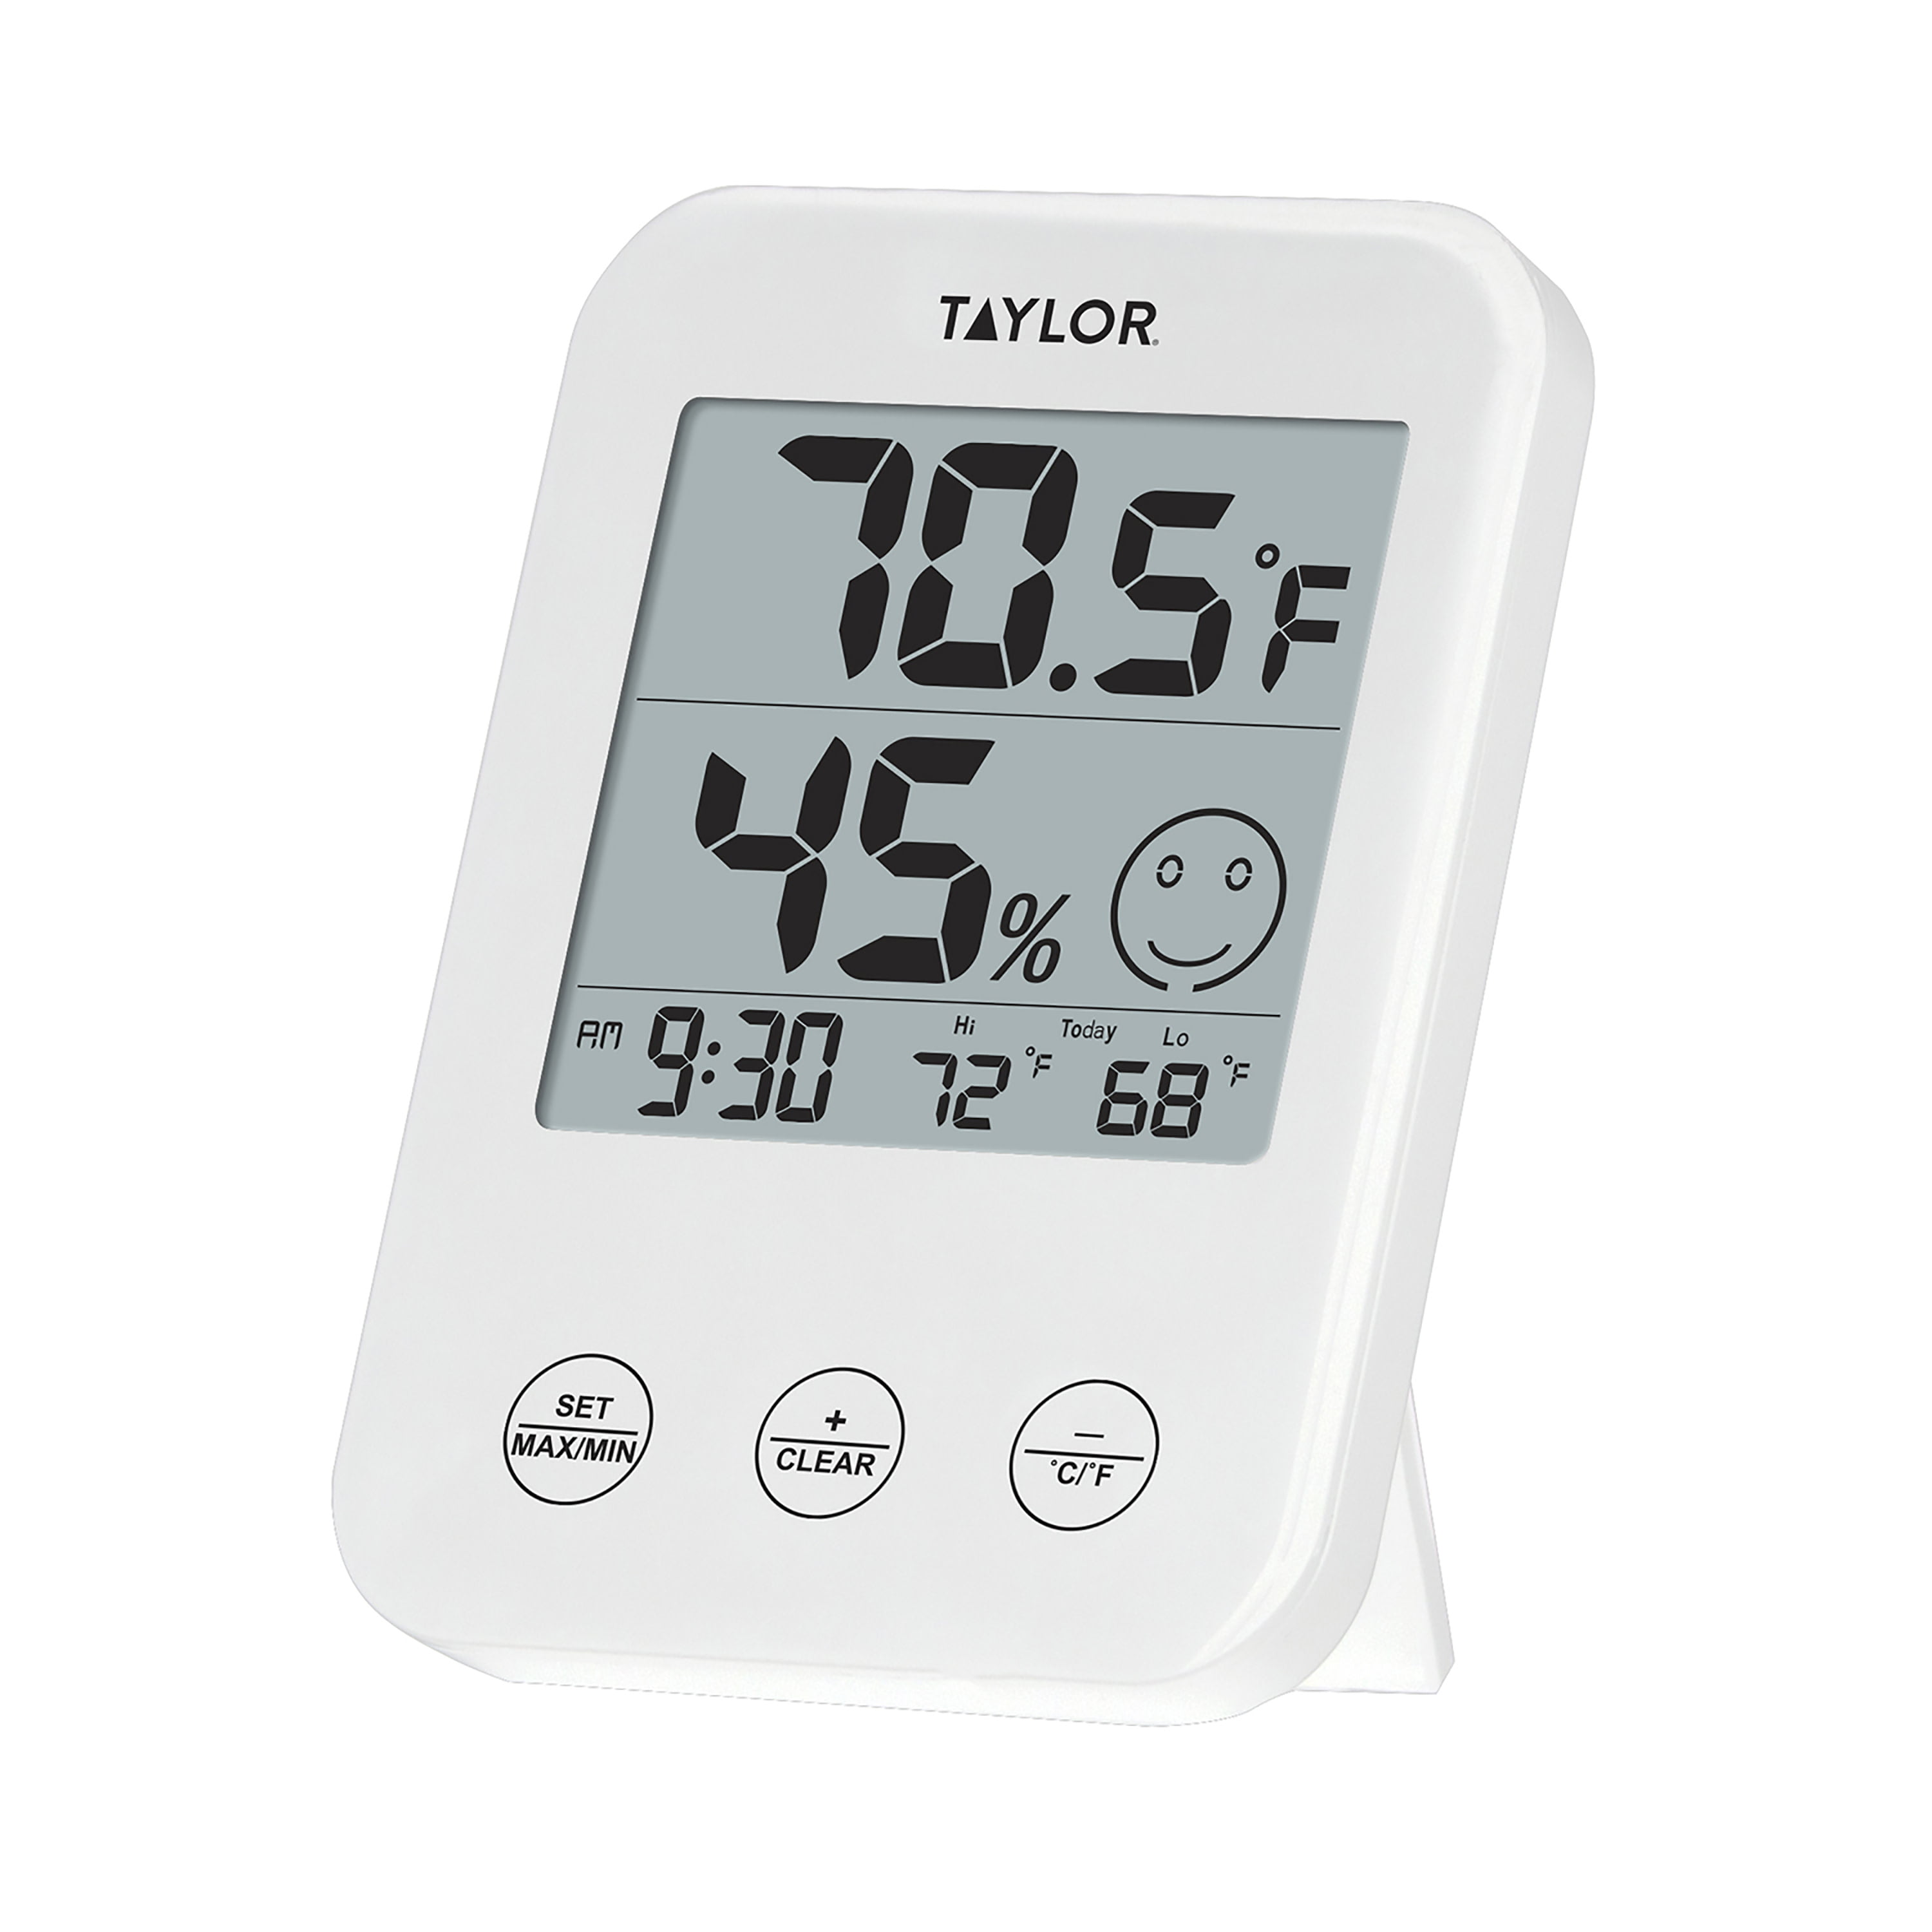 Taylor 6669378 Plastic Digital Thermometer, White